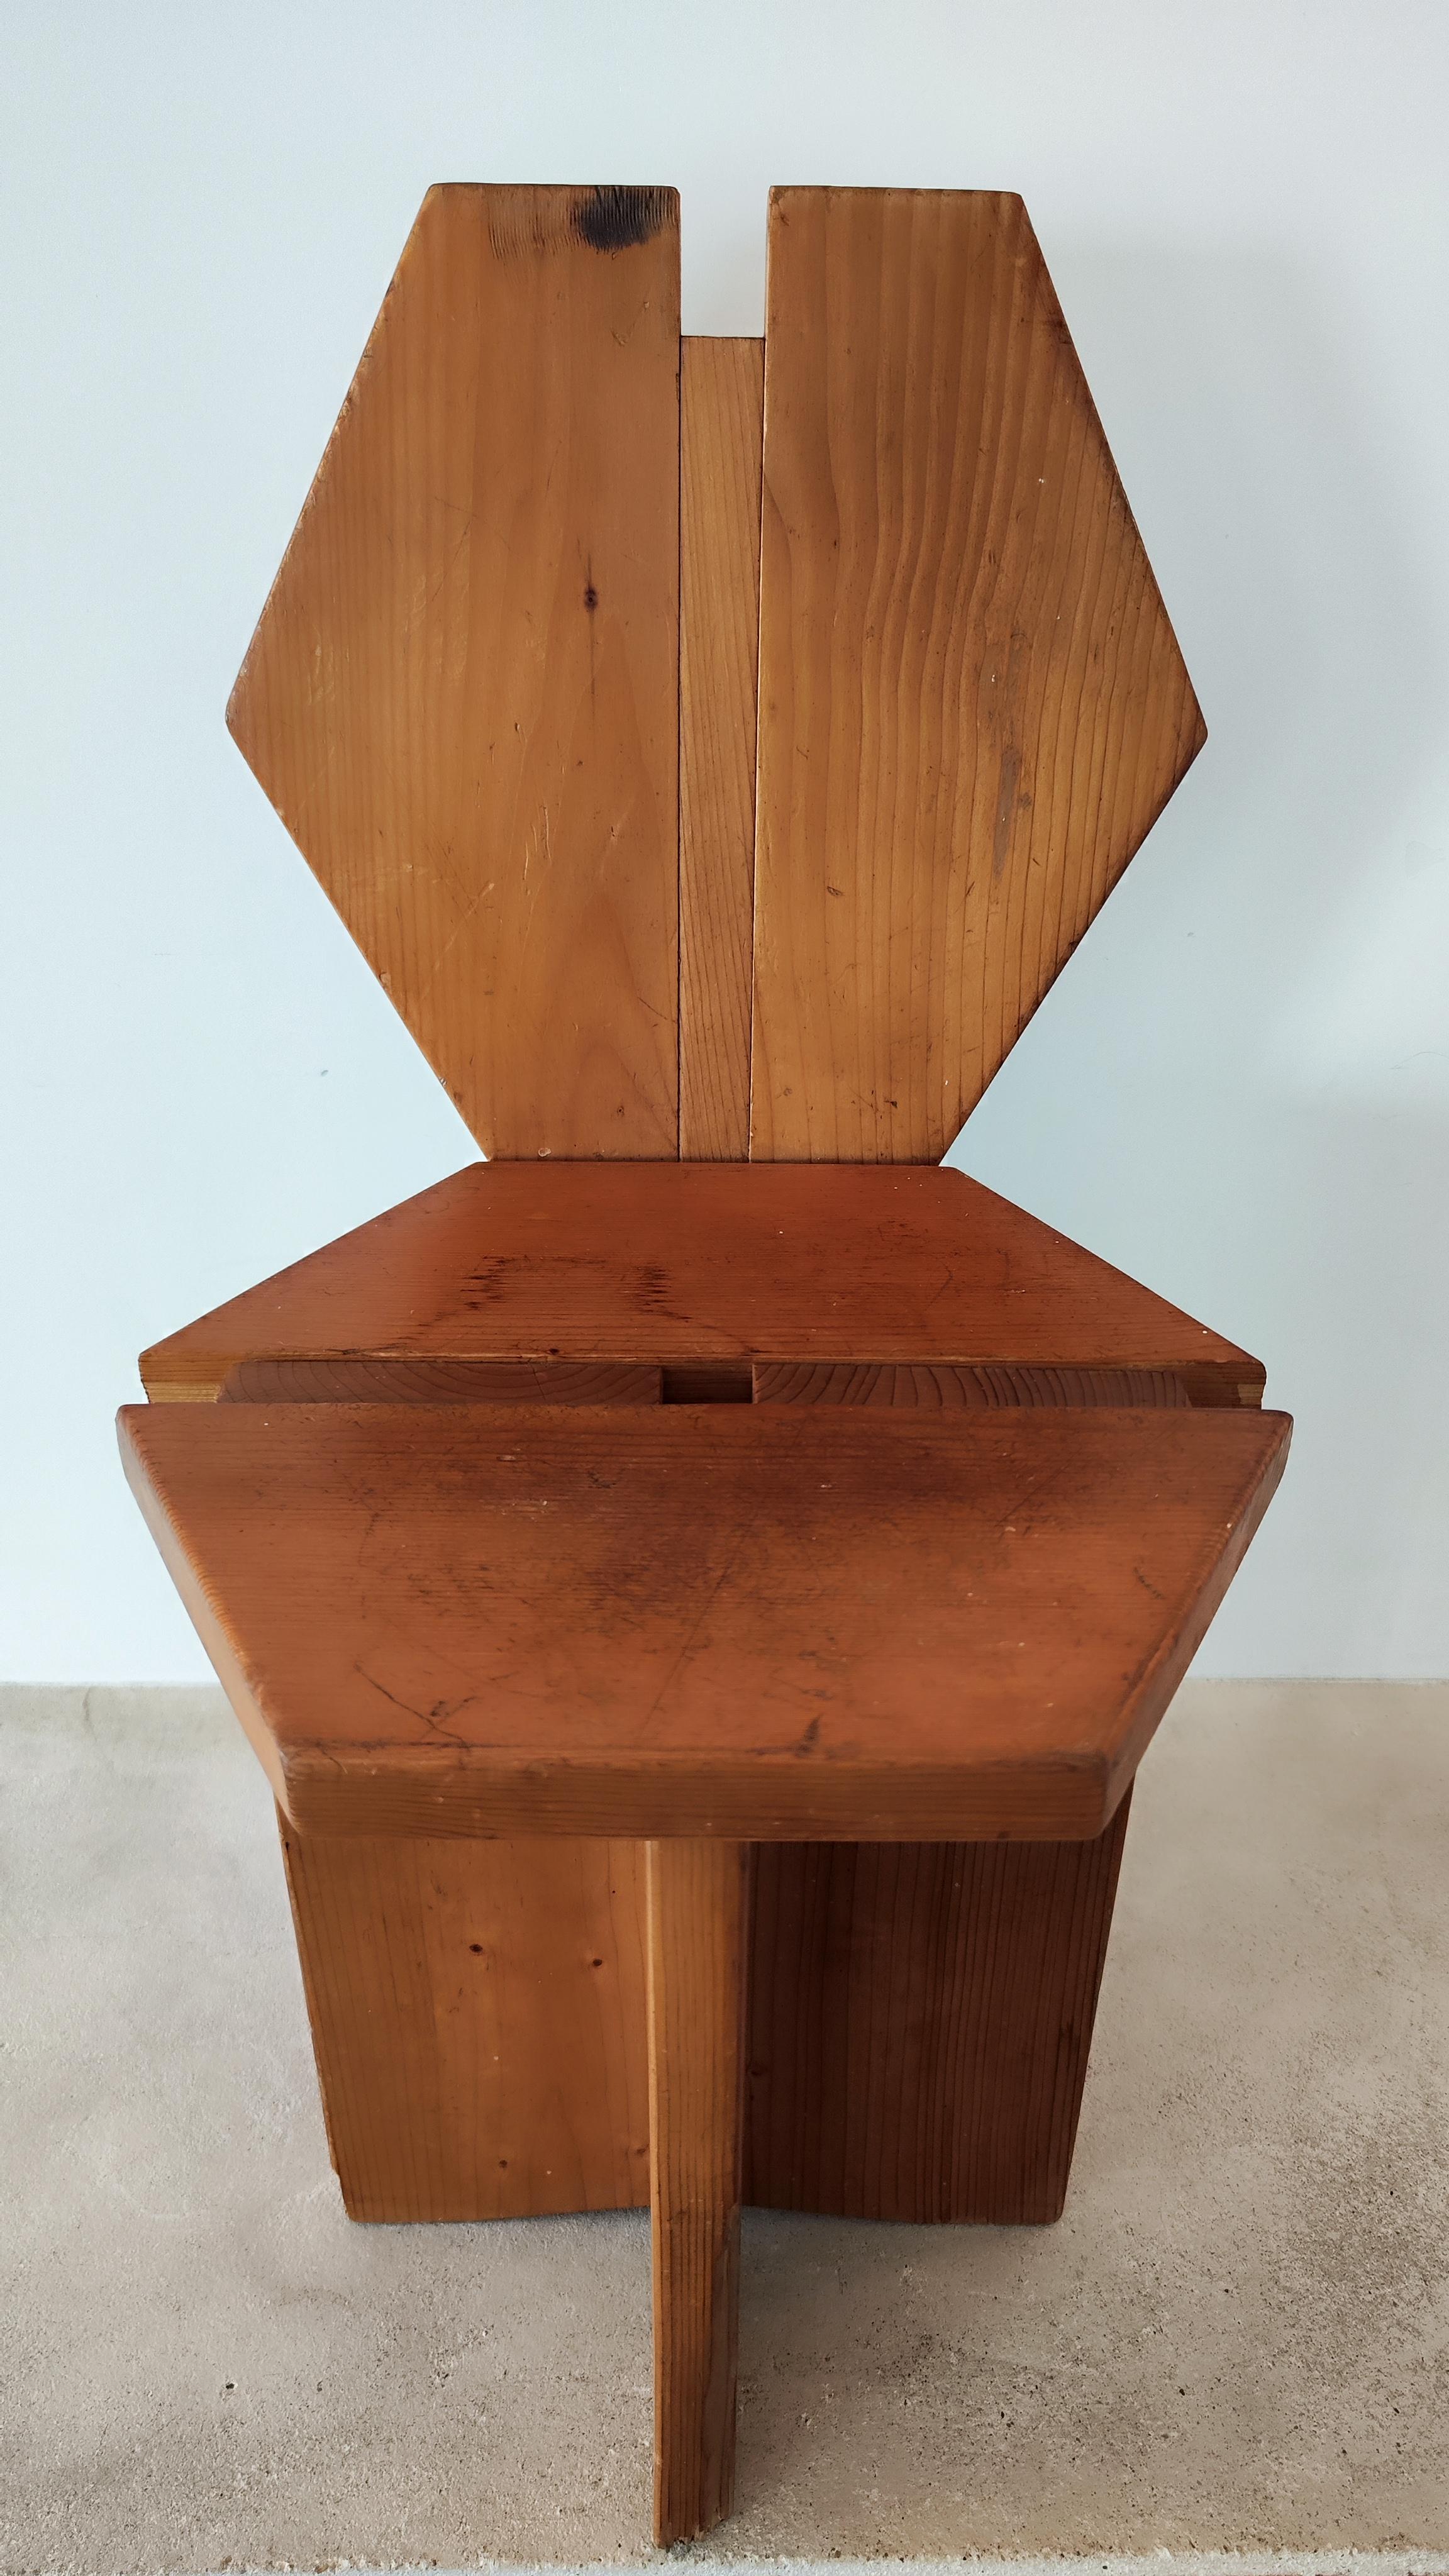 Mid-20th Century 60s brutalist pine chair, France, Méribel - René Martin for Charlotte Perriand